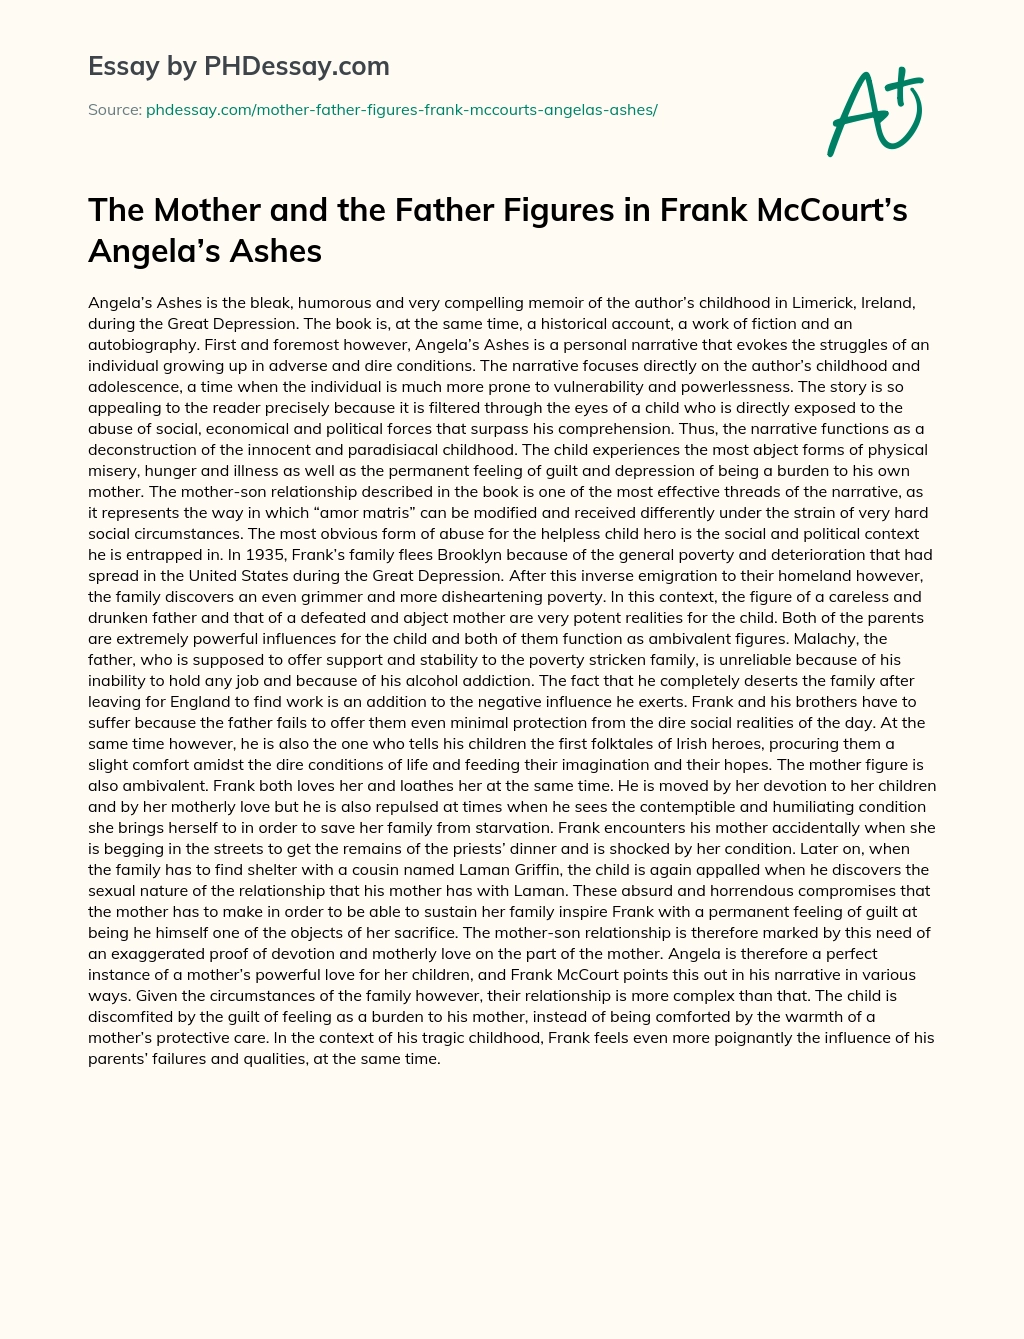 The Mother and the Father Figures in Frank McCourt’s Angela’s Ashes essay